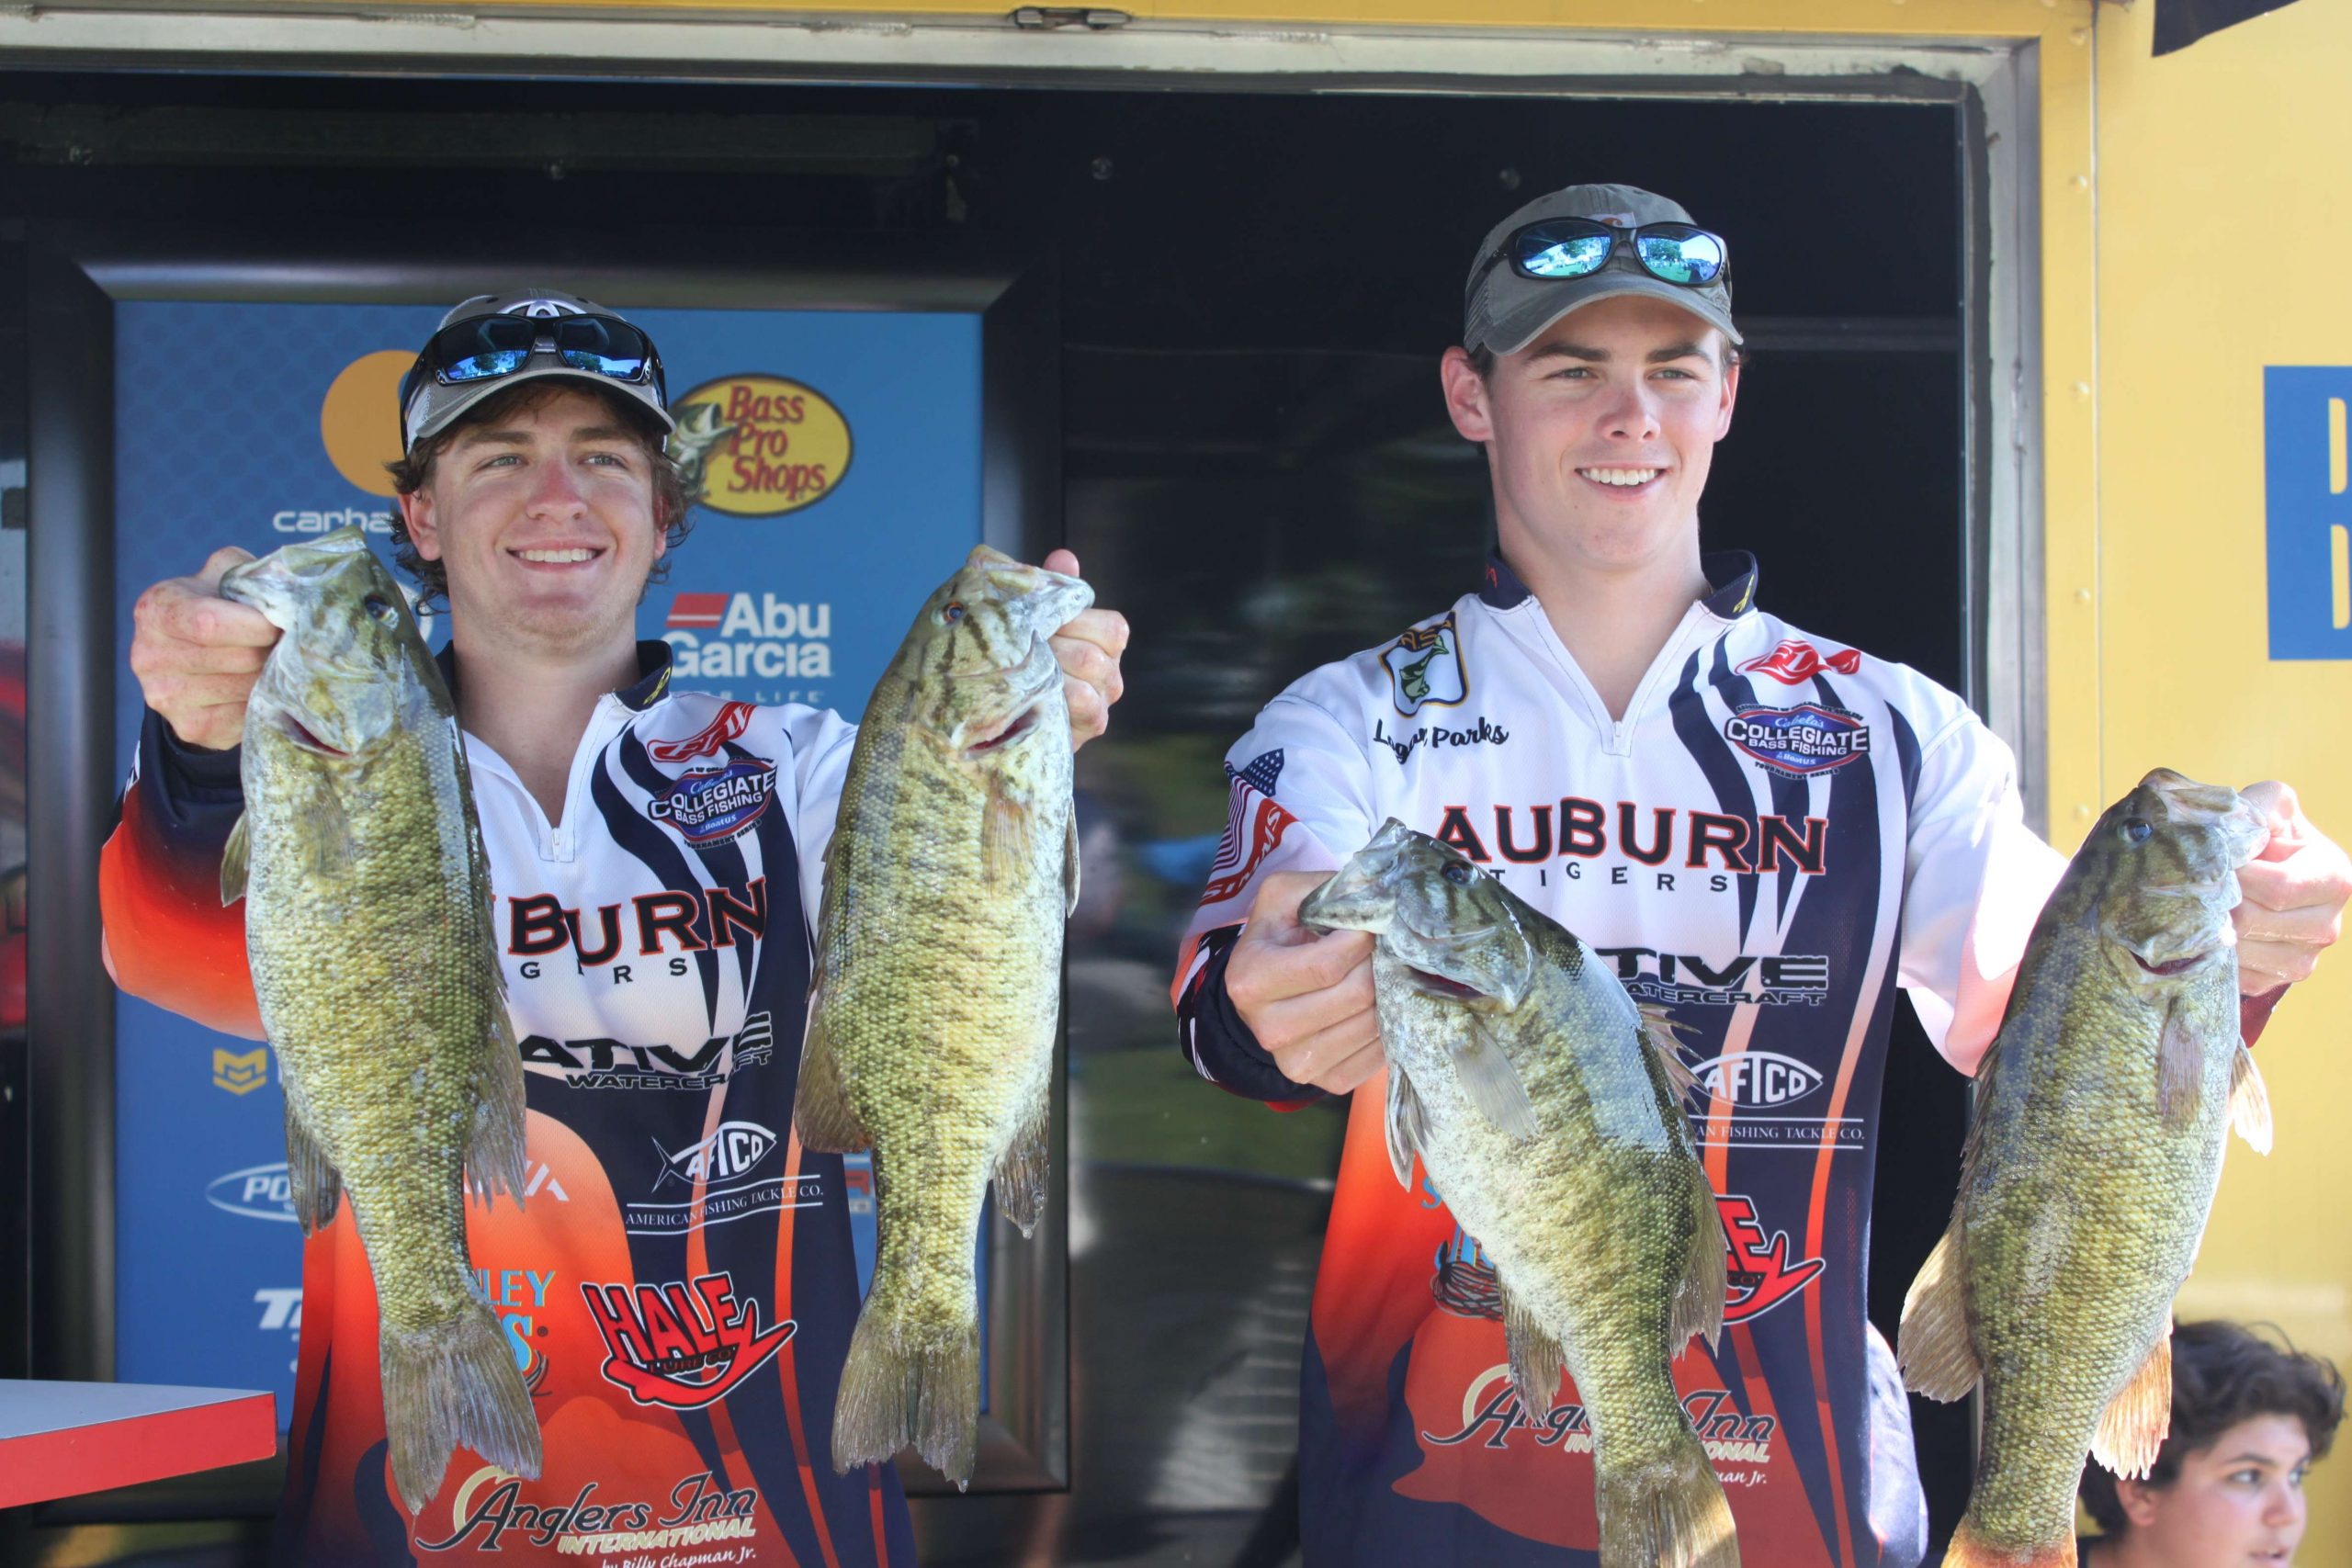 Logan Parks and Lucas Lindsay of Auburn University are in sixth place with 14-12.